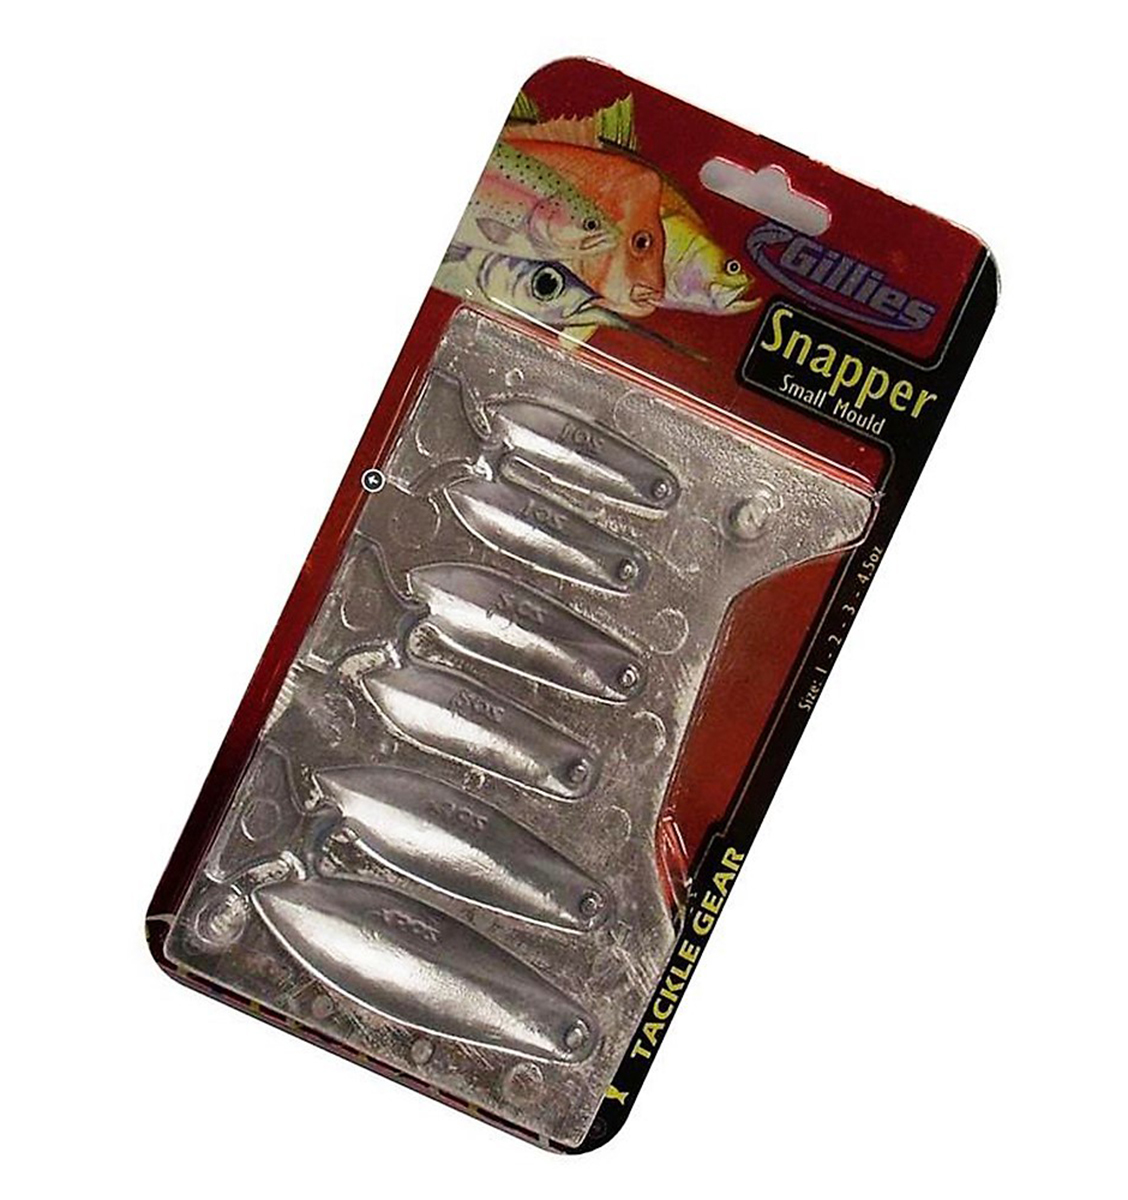 Gillies Small Snapper Sinker Mould Combo-Makes 4 Different Snapper Sinkers  at a Time